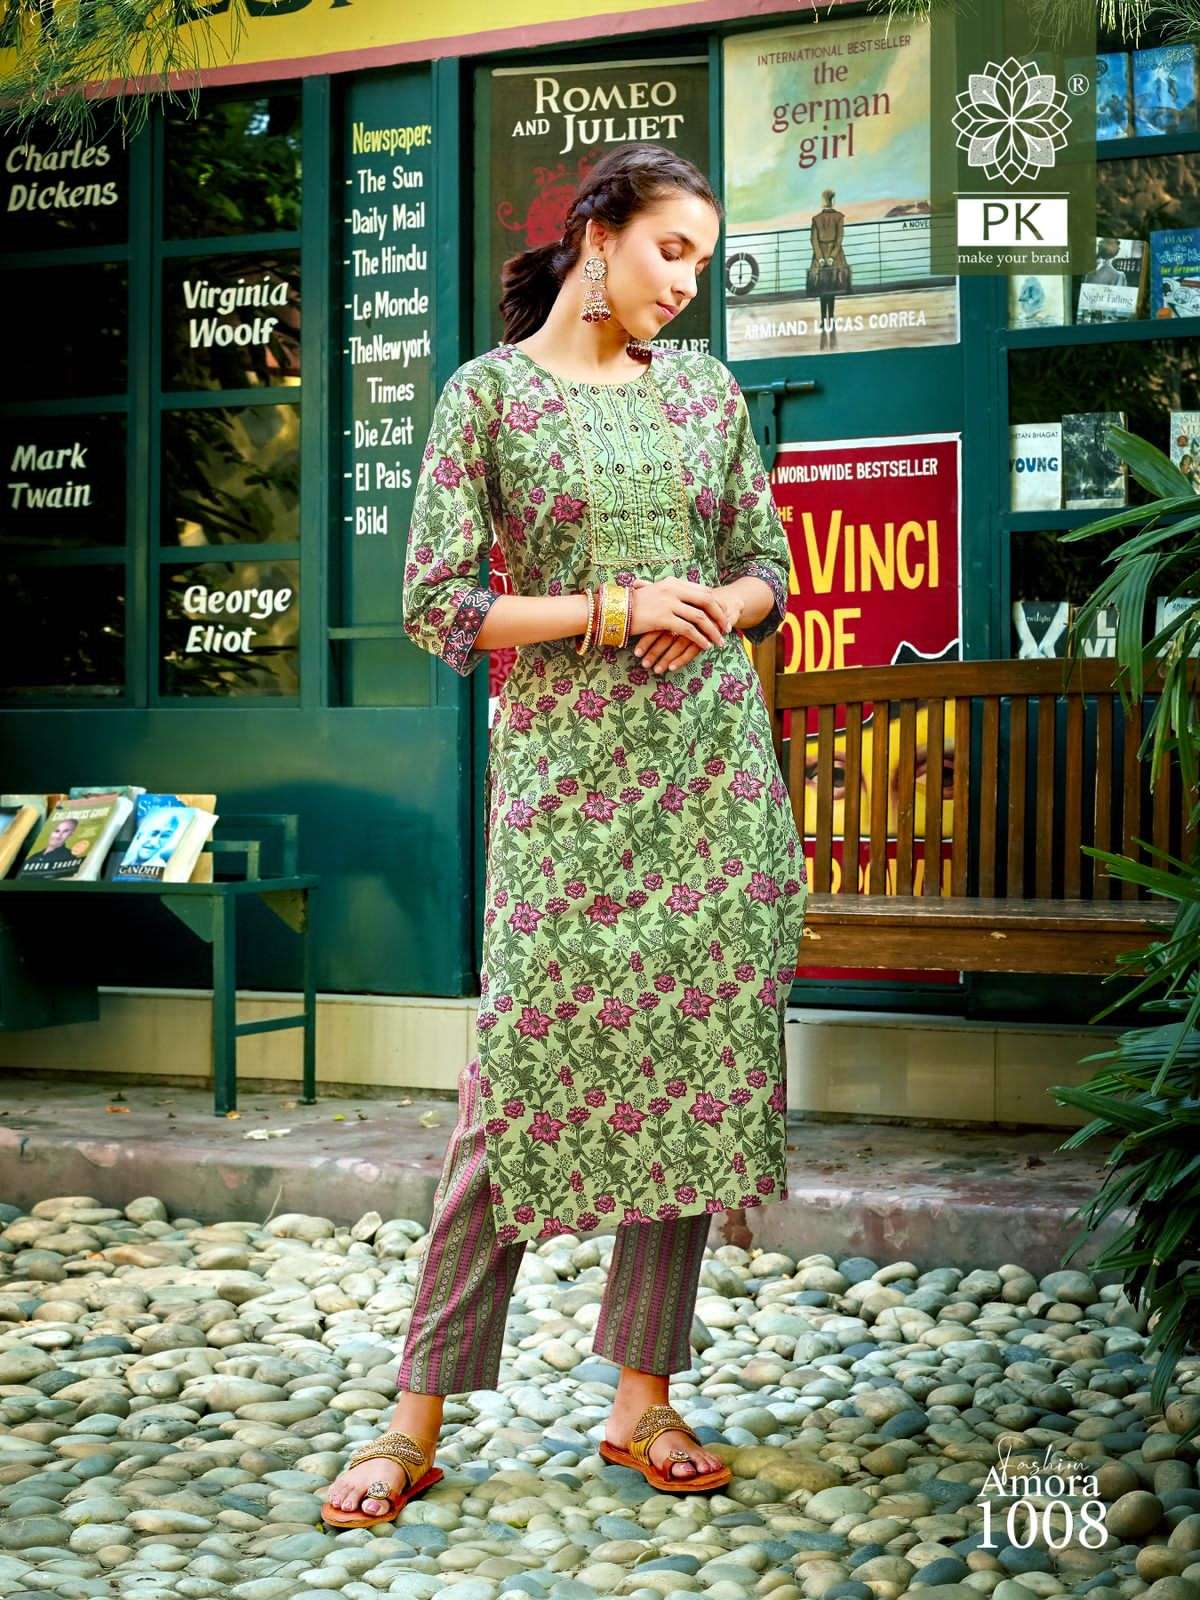 Fashion Amora Vol-1 By PK 1001 To 1012 Series Designer Stylish Fancy Colorful Beautiful Party Wear & Ethnic Wear Collection Cotton Print Kurtis With Bottom At Wholesale Price